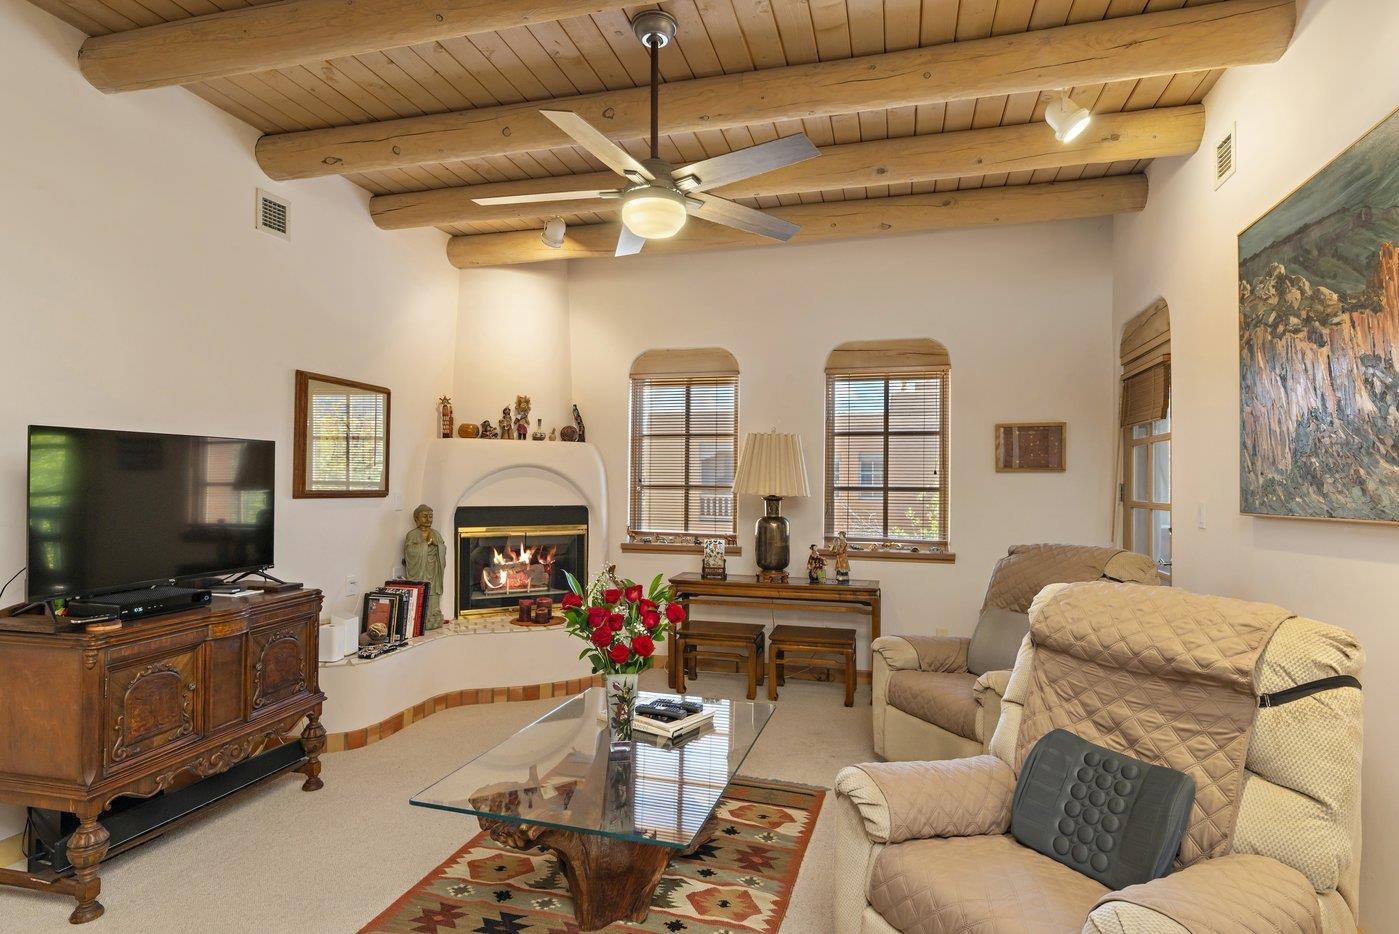 3101 Old Pecos Trail Unit 241 241, Santa Fe, New Mexico 87505, 2 Bedrooms Bedrooms, ,2 BathroomsBathrooms,Residential,For Sale,3101 Old Pecos Trail Unit 241 241,202101860